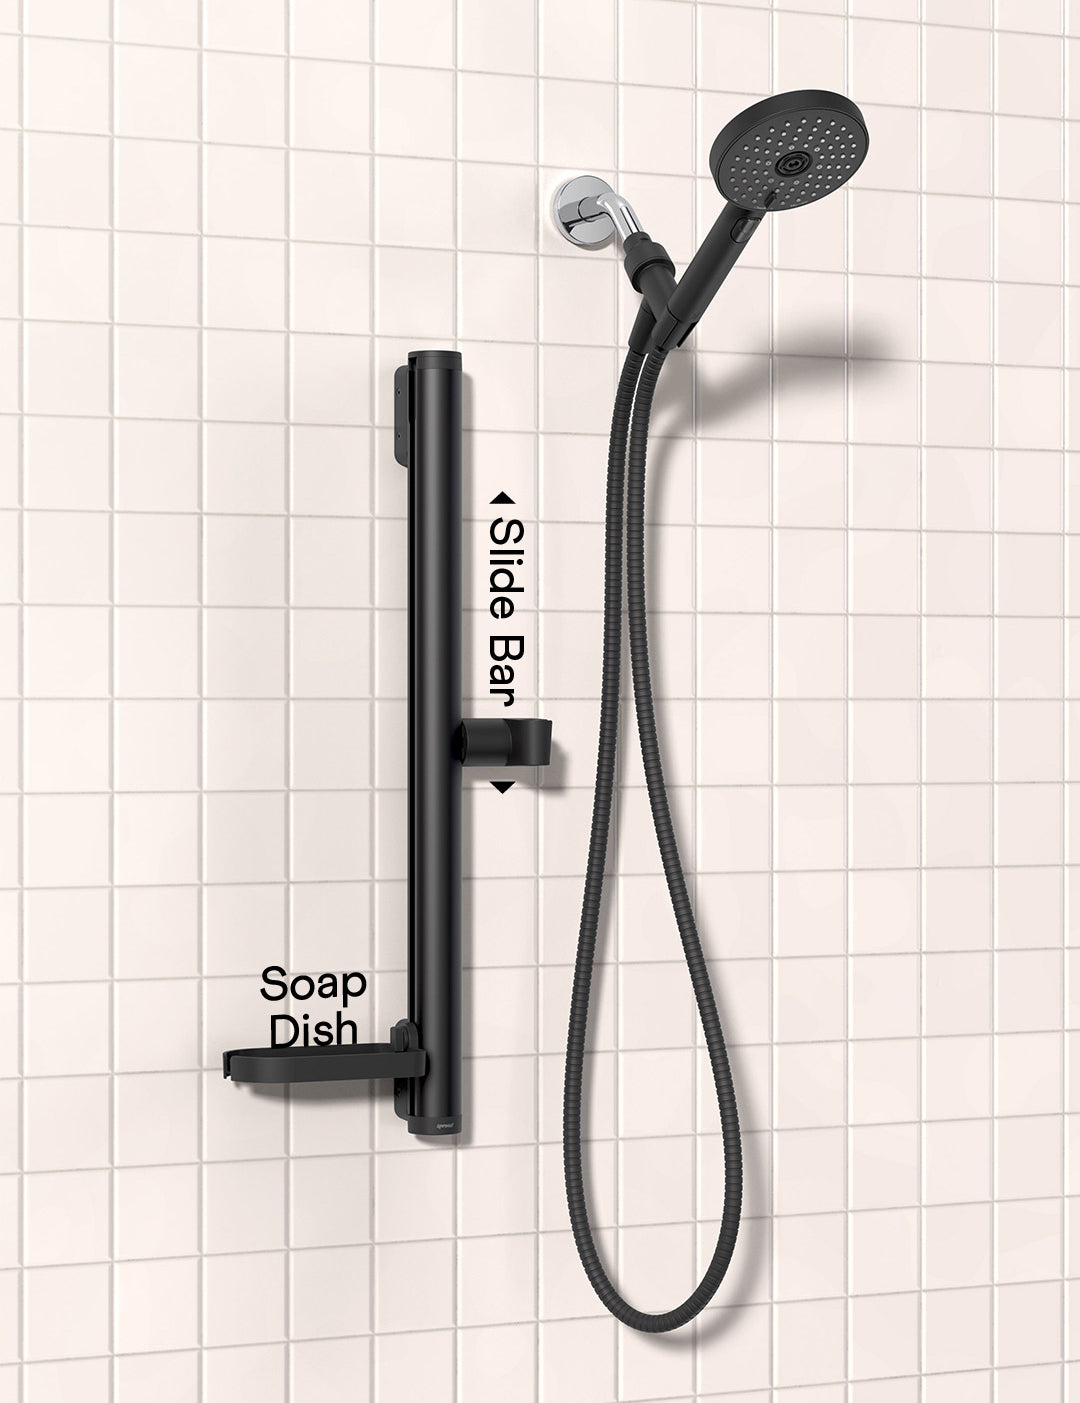 the sproos! Minimalist shower bundle includes the hand shower, slide bar, and soap dish to keep your shower clean and simple.